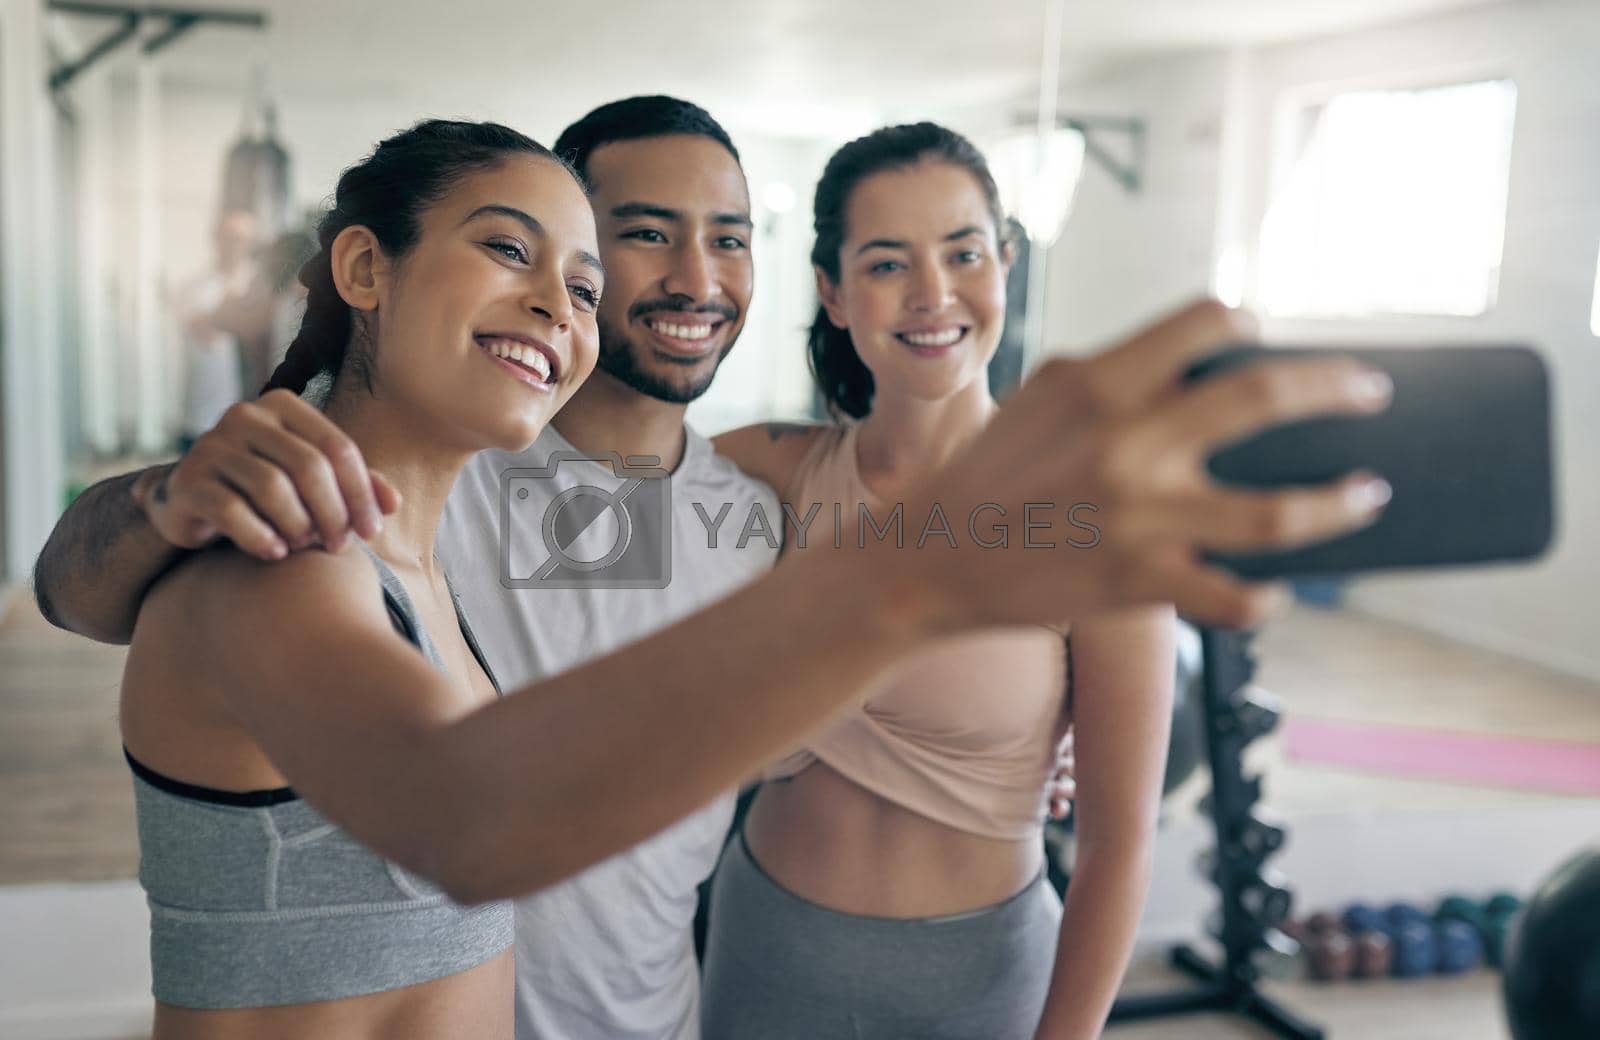 Shot of three young athletes taking a selfie while standing together in the gym.